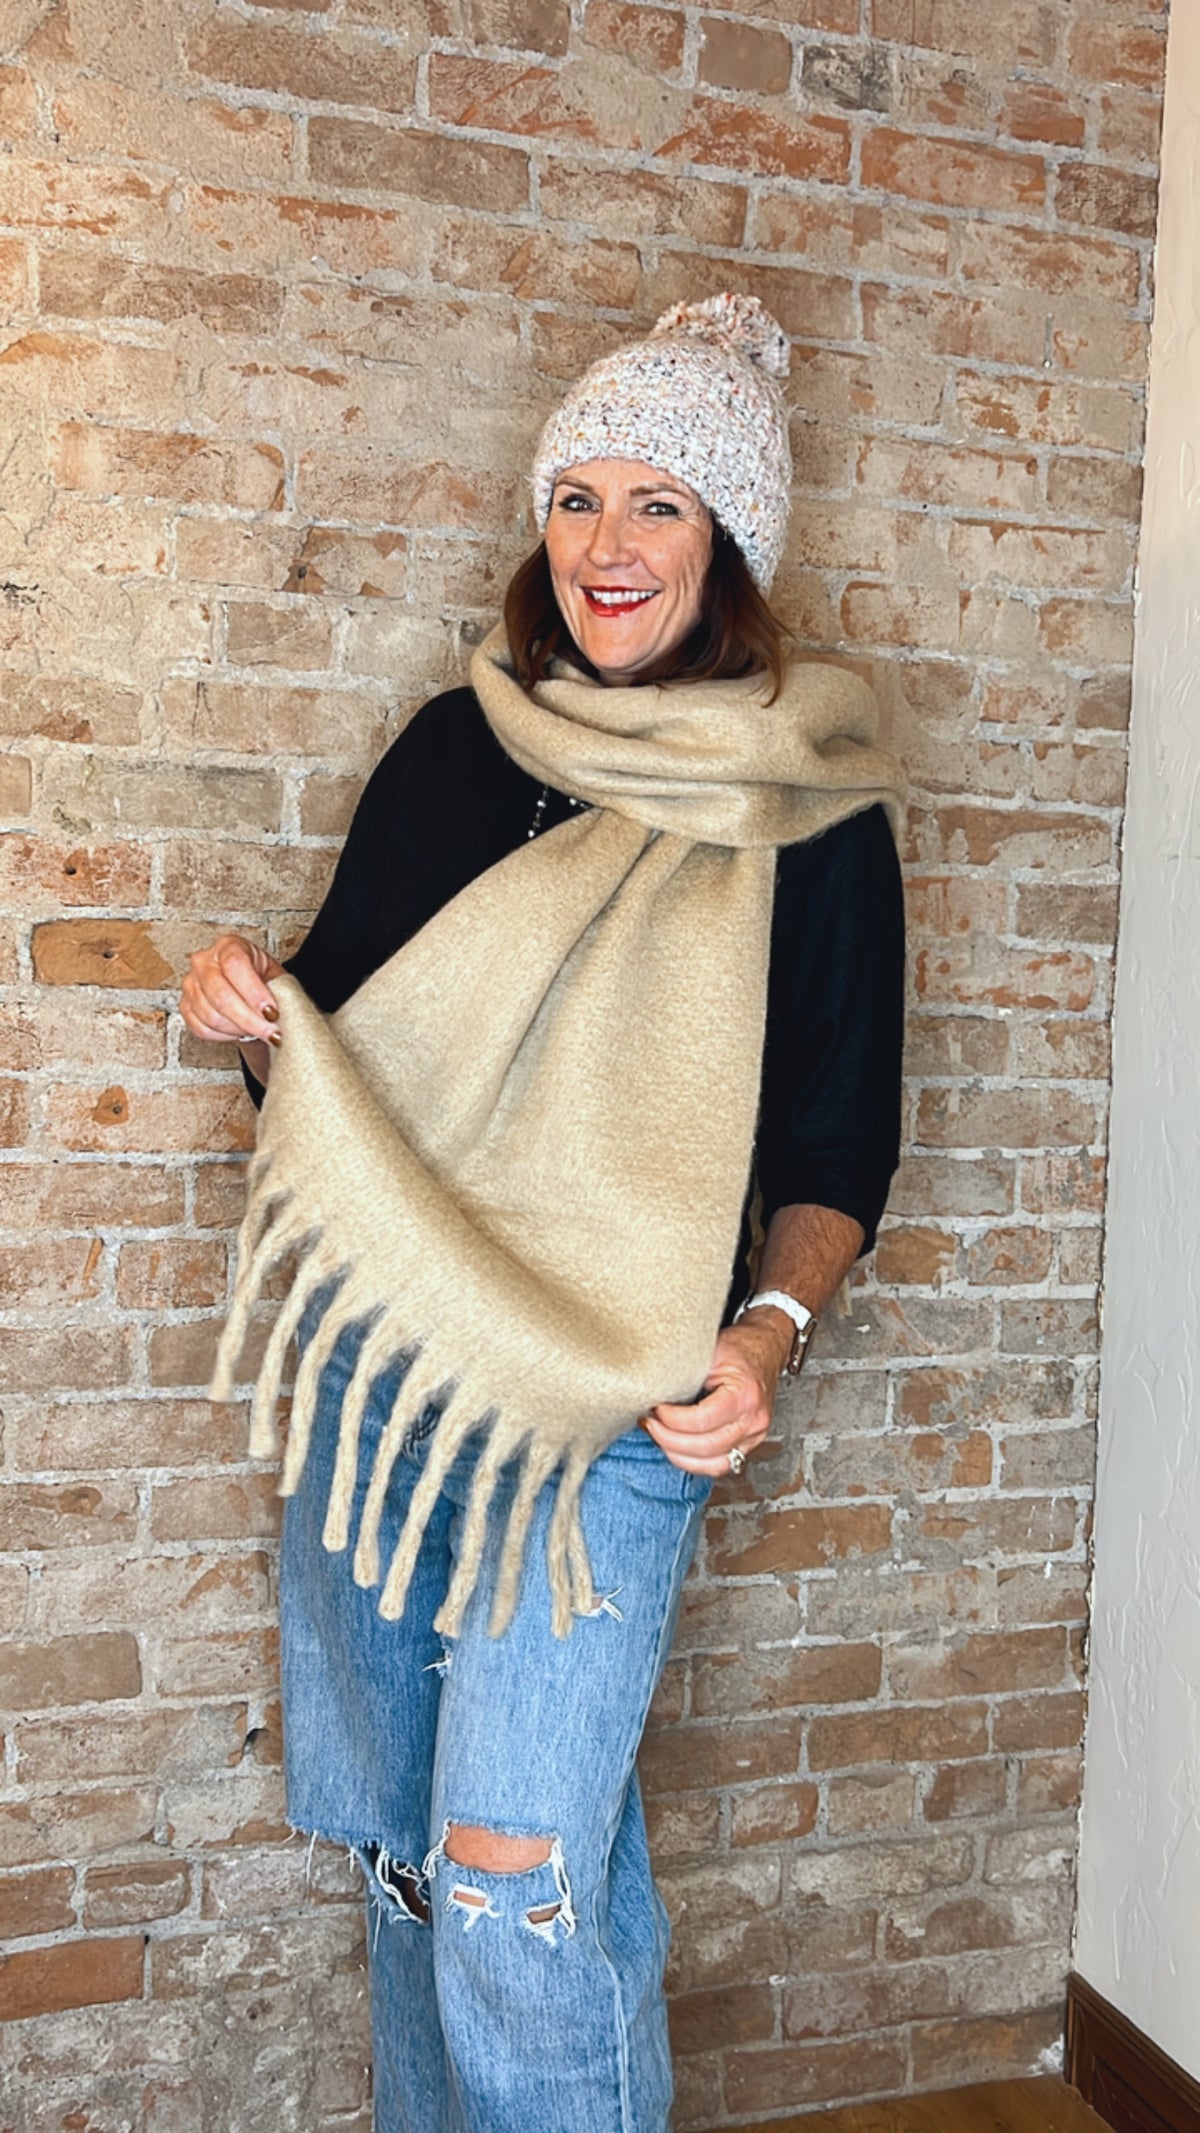 Mirabelle Woven Scarf